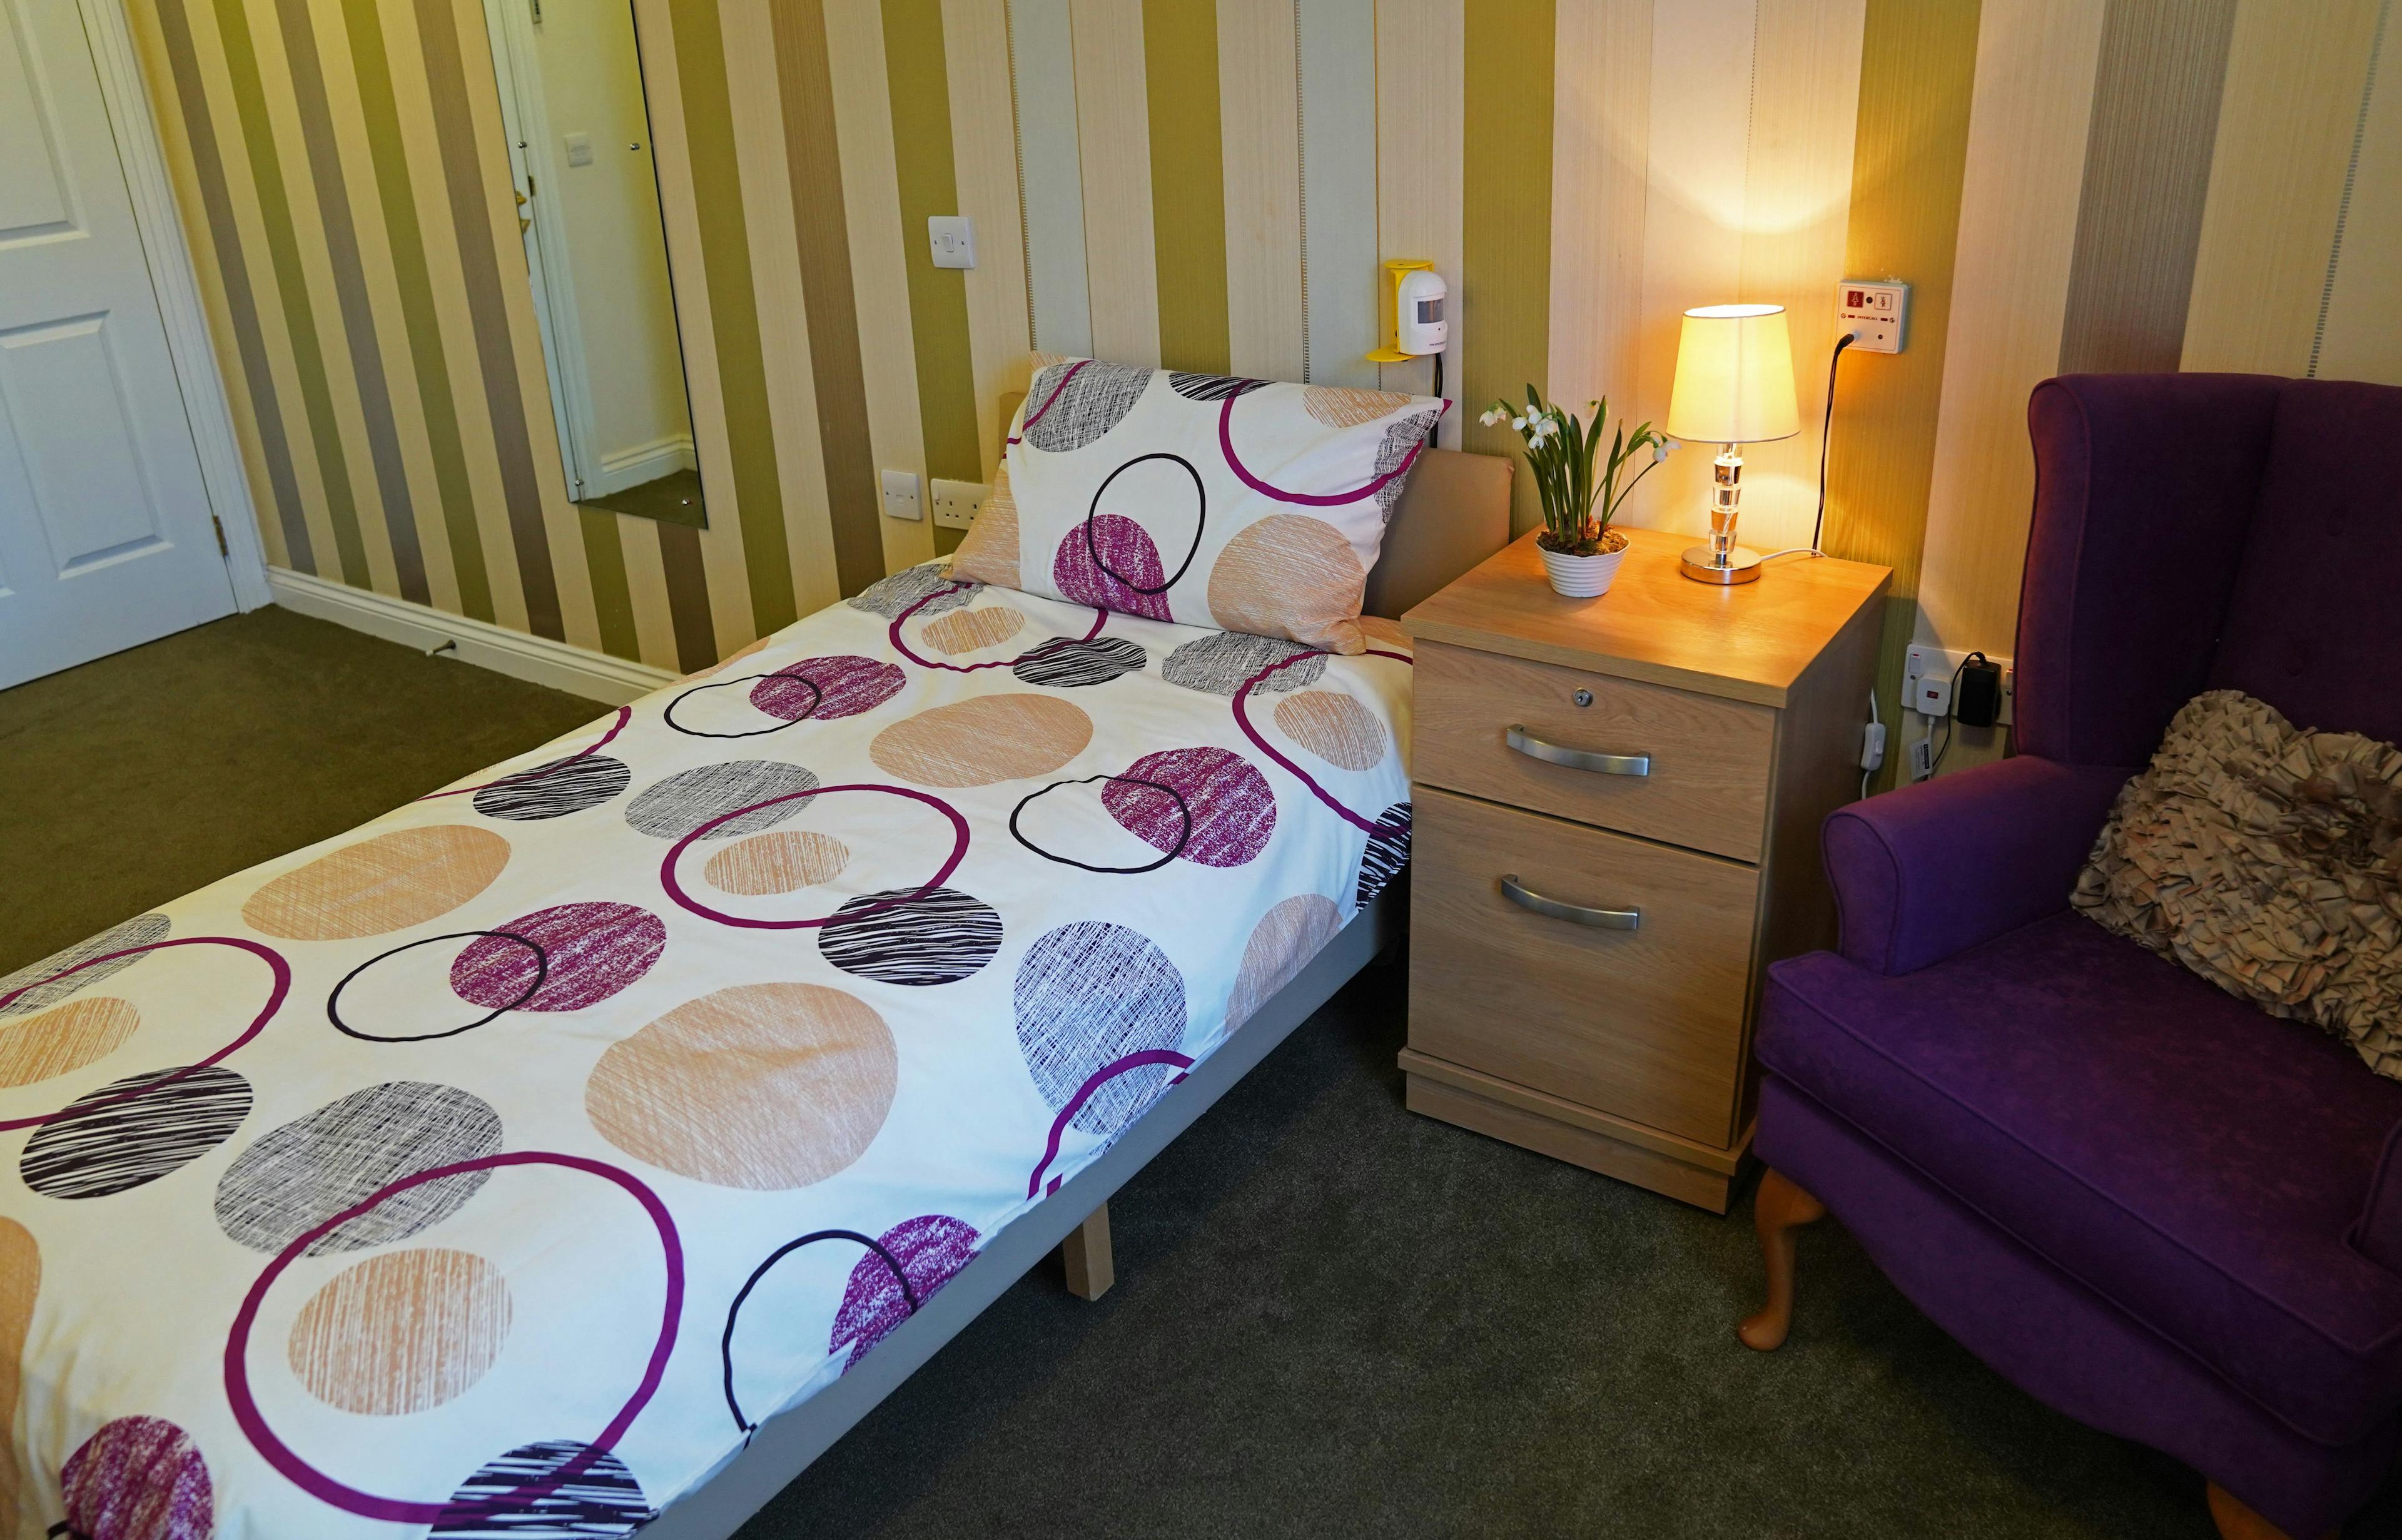 Bedroom of Haven care home in Pinner, London